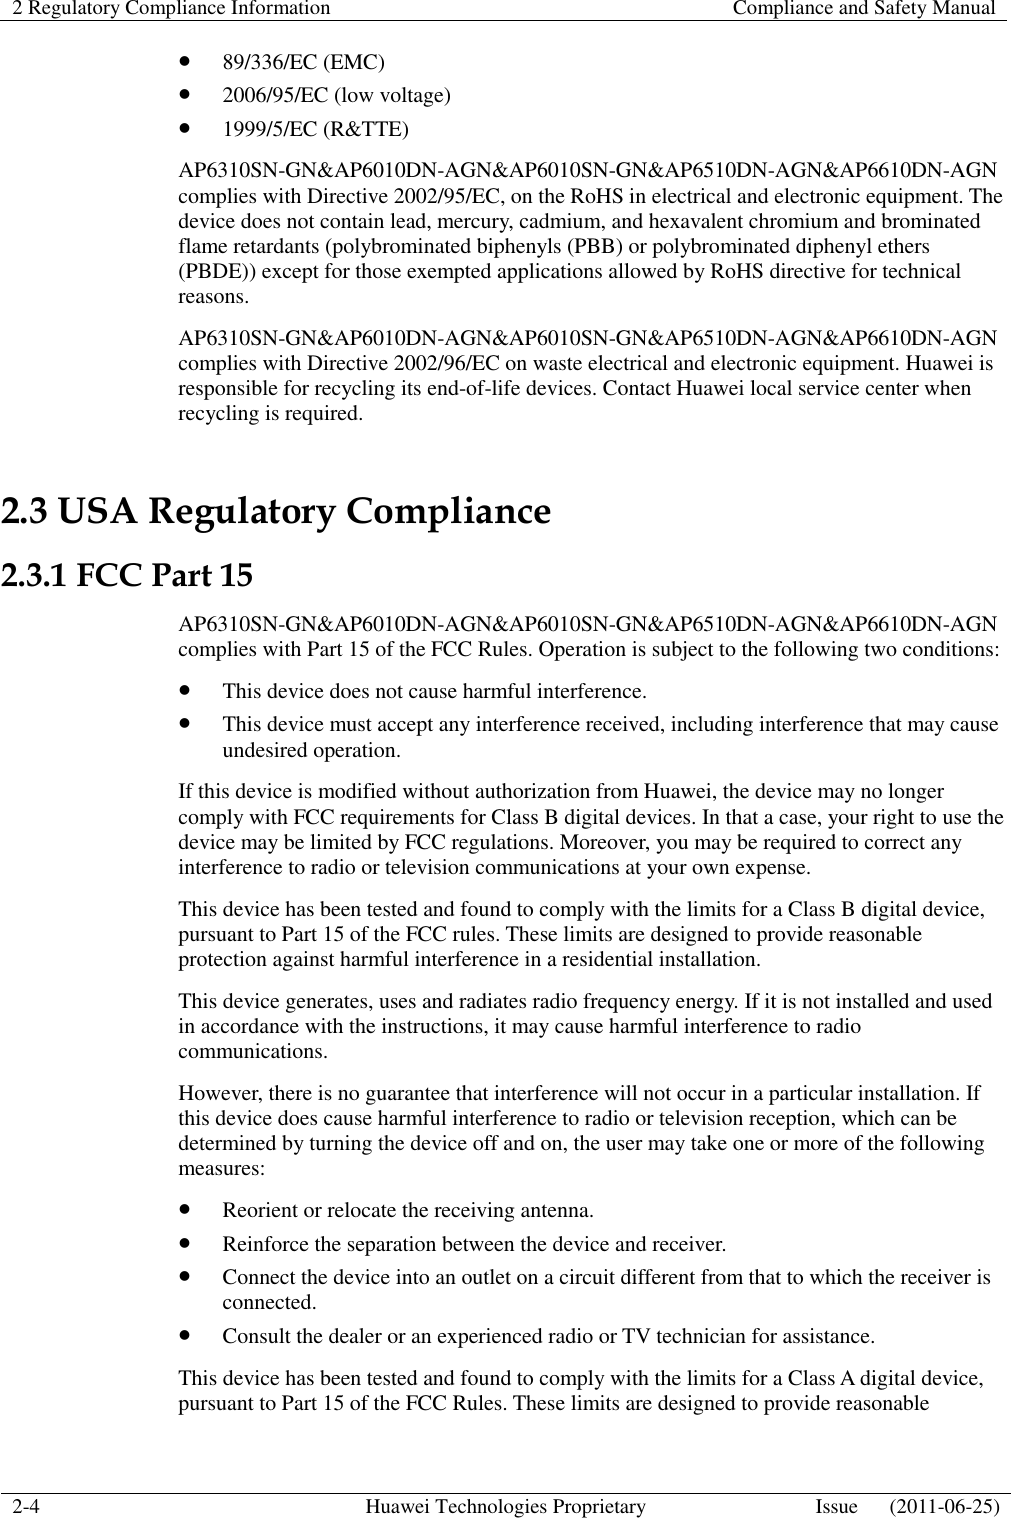 2 Regulatory Compliance Information    Compliance and Safety Manual  2-4 Huawei Technologies Proprietary Issue      (2011-06-25)   89/336/EC (EMC)  2006/95/EC (low voltage)  1999/5/EC (R&amp;TTE) AP6310SN-GN&amp;AP6010DN-AGN&amp;AP6010SN-GN&amp;AP6510DN-AGN&amp;AP6610DN-AGN complies with Directive 2002/95/EC, on the RoHS in electrical and electronic equipment. The device does not contain lead, mercury, cadmium, and hexavalent chromium and brominated flame retardants (polybrominated biphenyls (PBB) or polybrominated diphenyl ethers (PBDE)) except for those exempted applications allowed by RoHS directive for technical reasons. AP6310SN-GN&amp;AP6010DN-AGN&amp;AP6010SN-GN&amp;AP6510DN-AGN&amp;AP6610DN-AGN complies with Directive 2002/96/EC on waste electrical and electronic equipment. Huawei is responsible for recycling its end-of-life devices. Contact Huawei local service center when recycling is required. 2.3 USA Regulatory Compliance 2.3.1 FCC Part 15 AP6310SN-GN&amp;AP6010DN-AGN&amp;AP6010SN-GN&amp;AP6510DN-AGN&amp;AP6610DN-AGN complies with Part 15 of the FCC Rules. Operation is subject to the following two conditions:  This device does not cause harmful interference.  This device must accept any interference received, including interference that may cause undesired operation. If this device is modified without authorization from Huawei, the device may no longer comply with FCC requirements for Class B digital devices. In that a case, your right to use the device may be limited by FCC regulations. Moreover, you may be required to correct any interference to radio or television communications at your own expense. This device has been tested and found to comply with the limits for a Class B digital device, pursuant to Part 15 of the FCC rules. These limits are designed to provide reasonable protection against harmful interference in a residential installation. This device generates, uses and radiates radio frequency energy. If it is not installed and used in accordance with the instructions, it may cause harmful interference to radio communications. However, there is no guarantee that interference will not occur in a particular installation. If this device does cause harmful interference to radio or television reception, which can be determined by turning the device off and on, the user may take one or more of the following measures:  Reorient or relocate the receiving antenna.  Reinforce the separation between the device and receiver.  Connect the device into an outlet on a circuit different from that to which the receiver is connected.  Consult the dealer or an experienced radio or TV technician for assistance. This device has been tested and found to comply with the limits for a Class A digital device, pursuant to Part 15 of the FCC Rules. These limits are designed to provide reasonable   